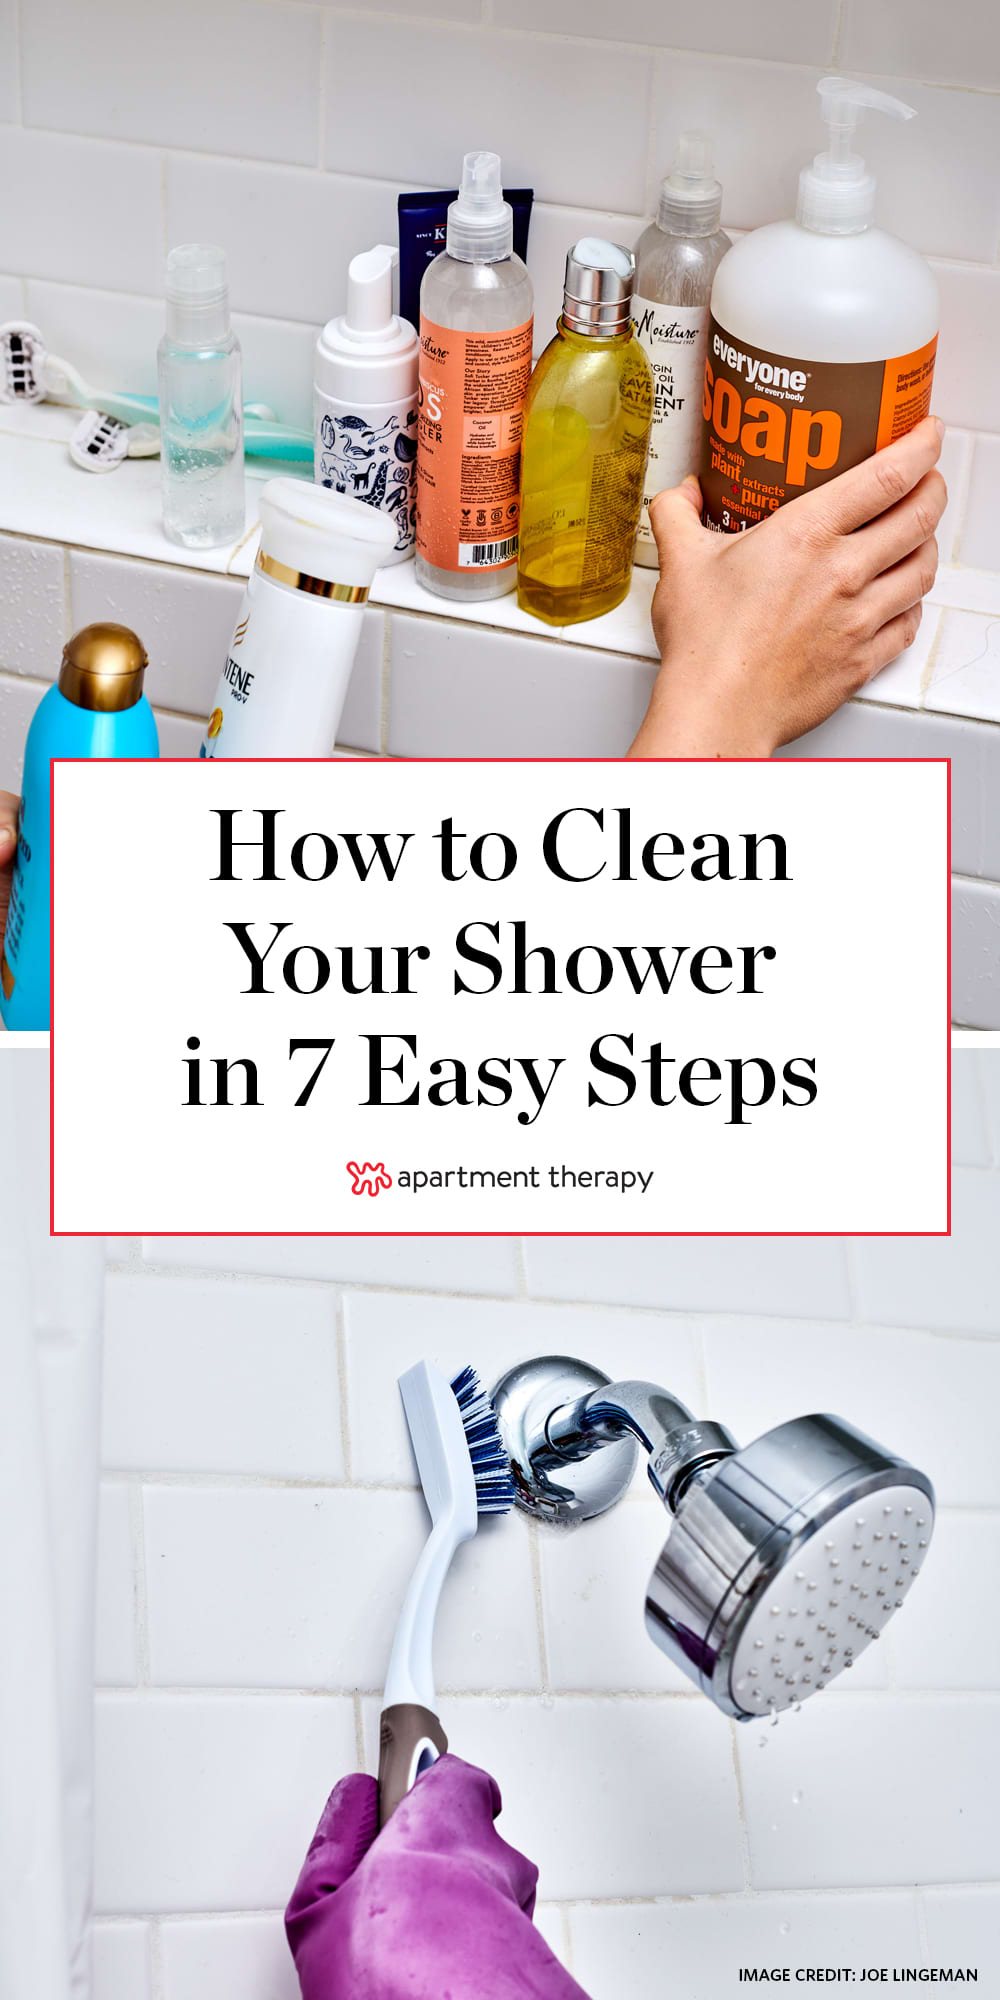 https://cdn.apartmenttherapy.info/image/upload/v1605634135/at/art/photo/2020-11/Clean-Shower/how-to-clean-a-shower-tutorial.jpg